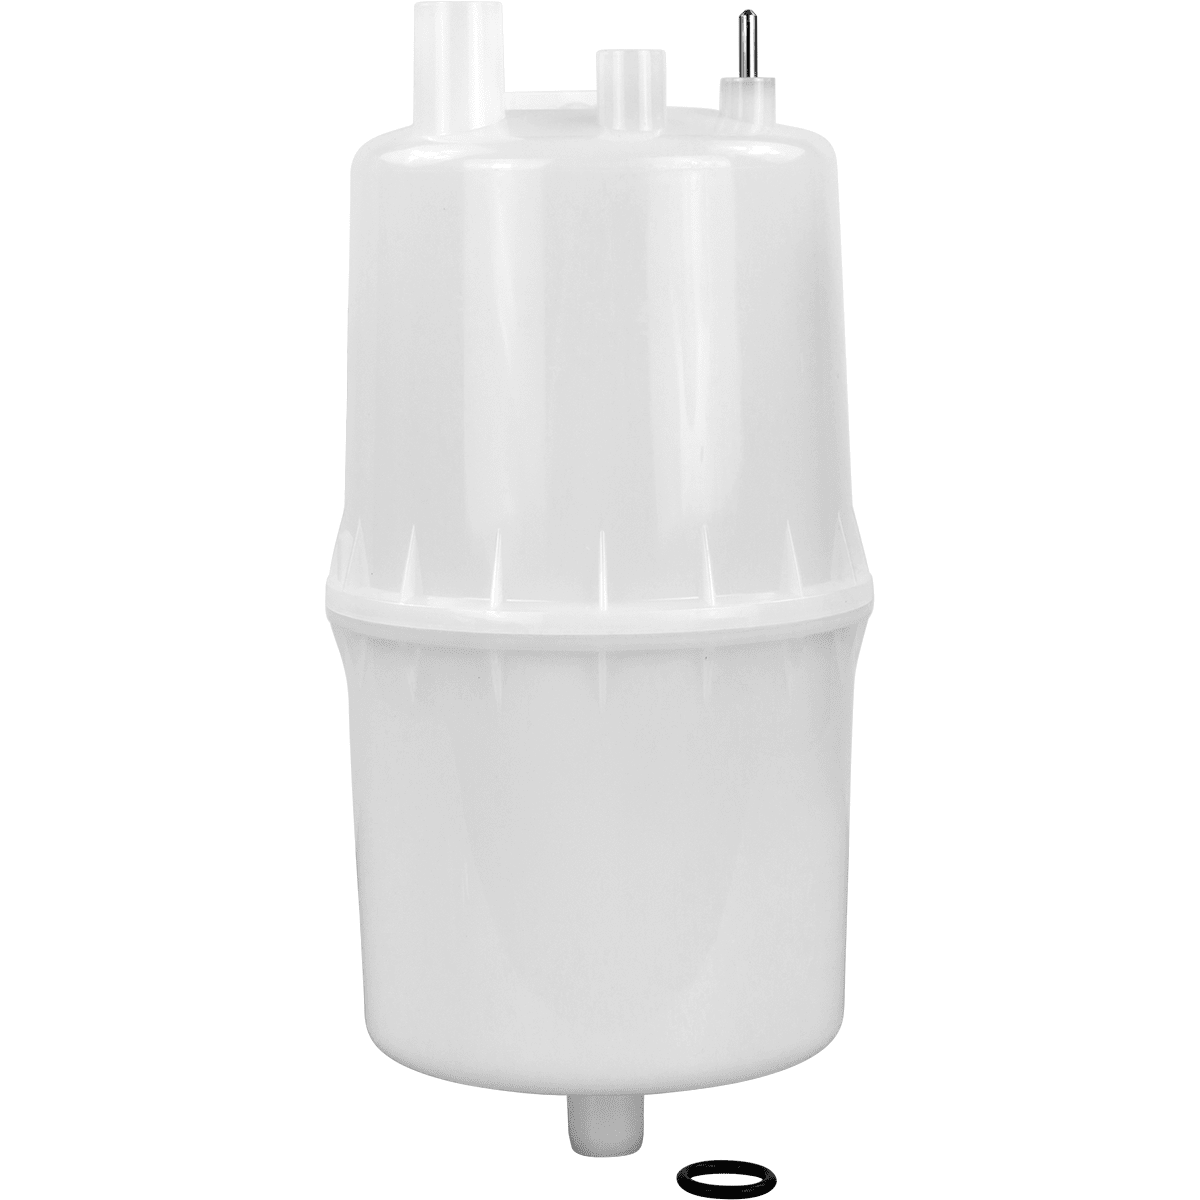 Aprilaire 204aac Steam Humidifier Cylinder (fits Nortec® 204)